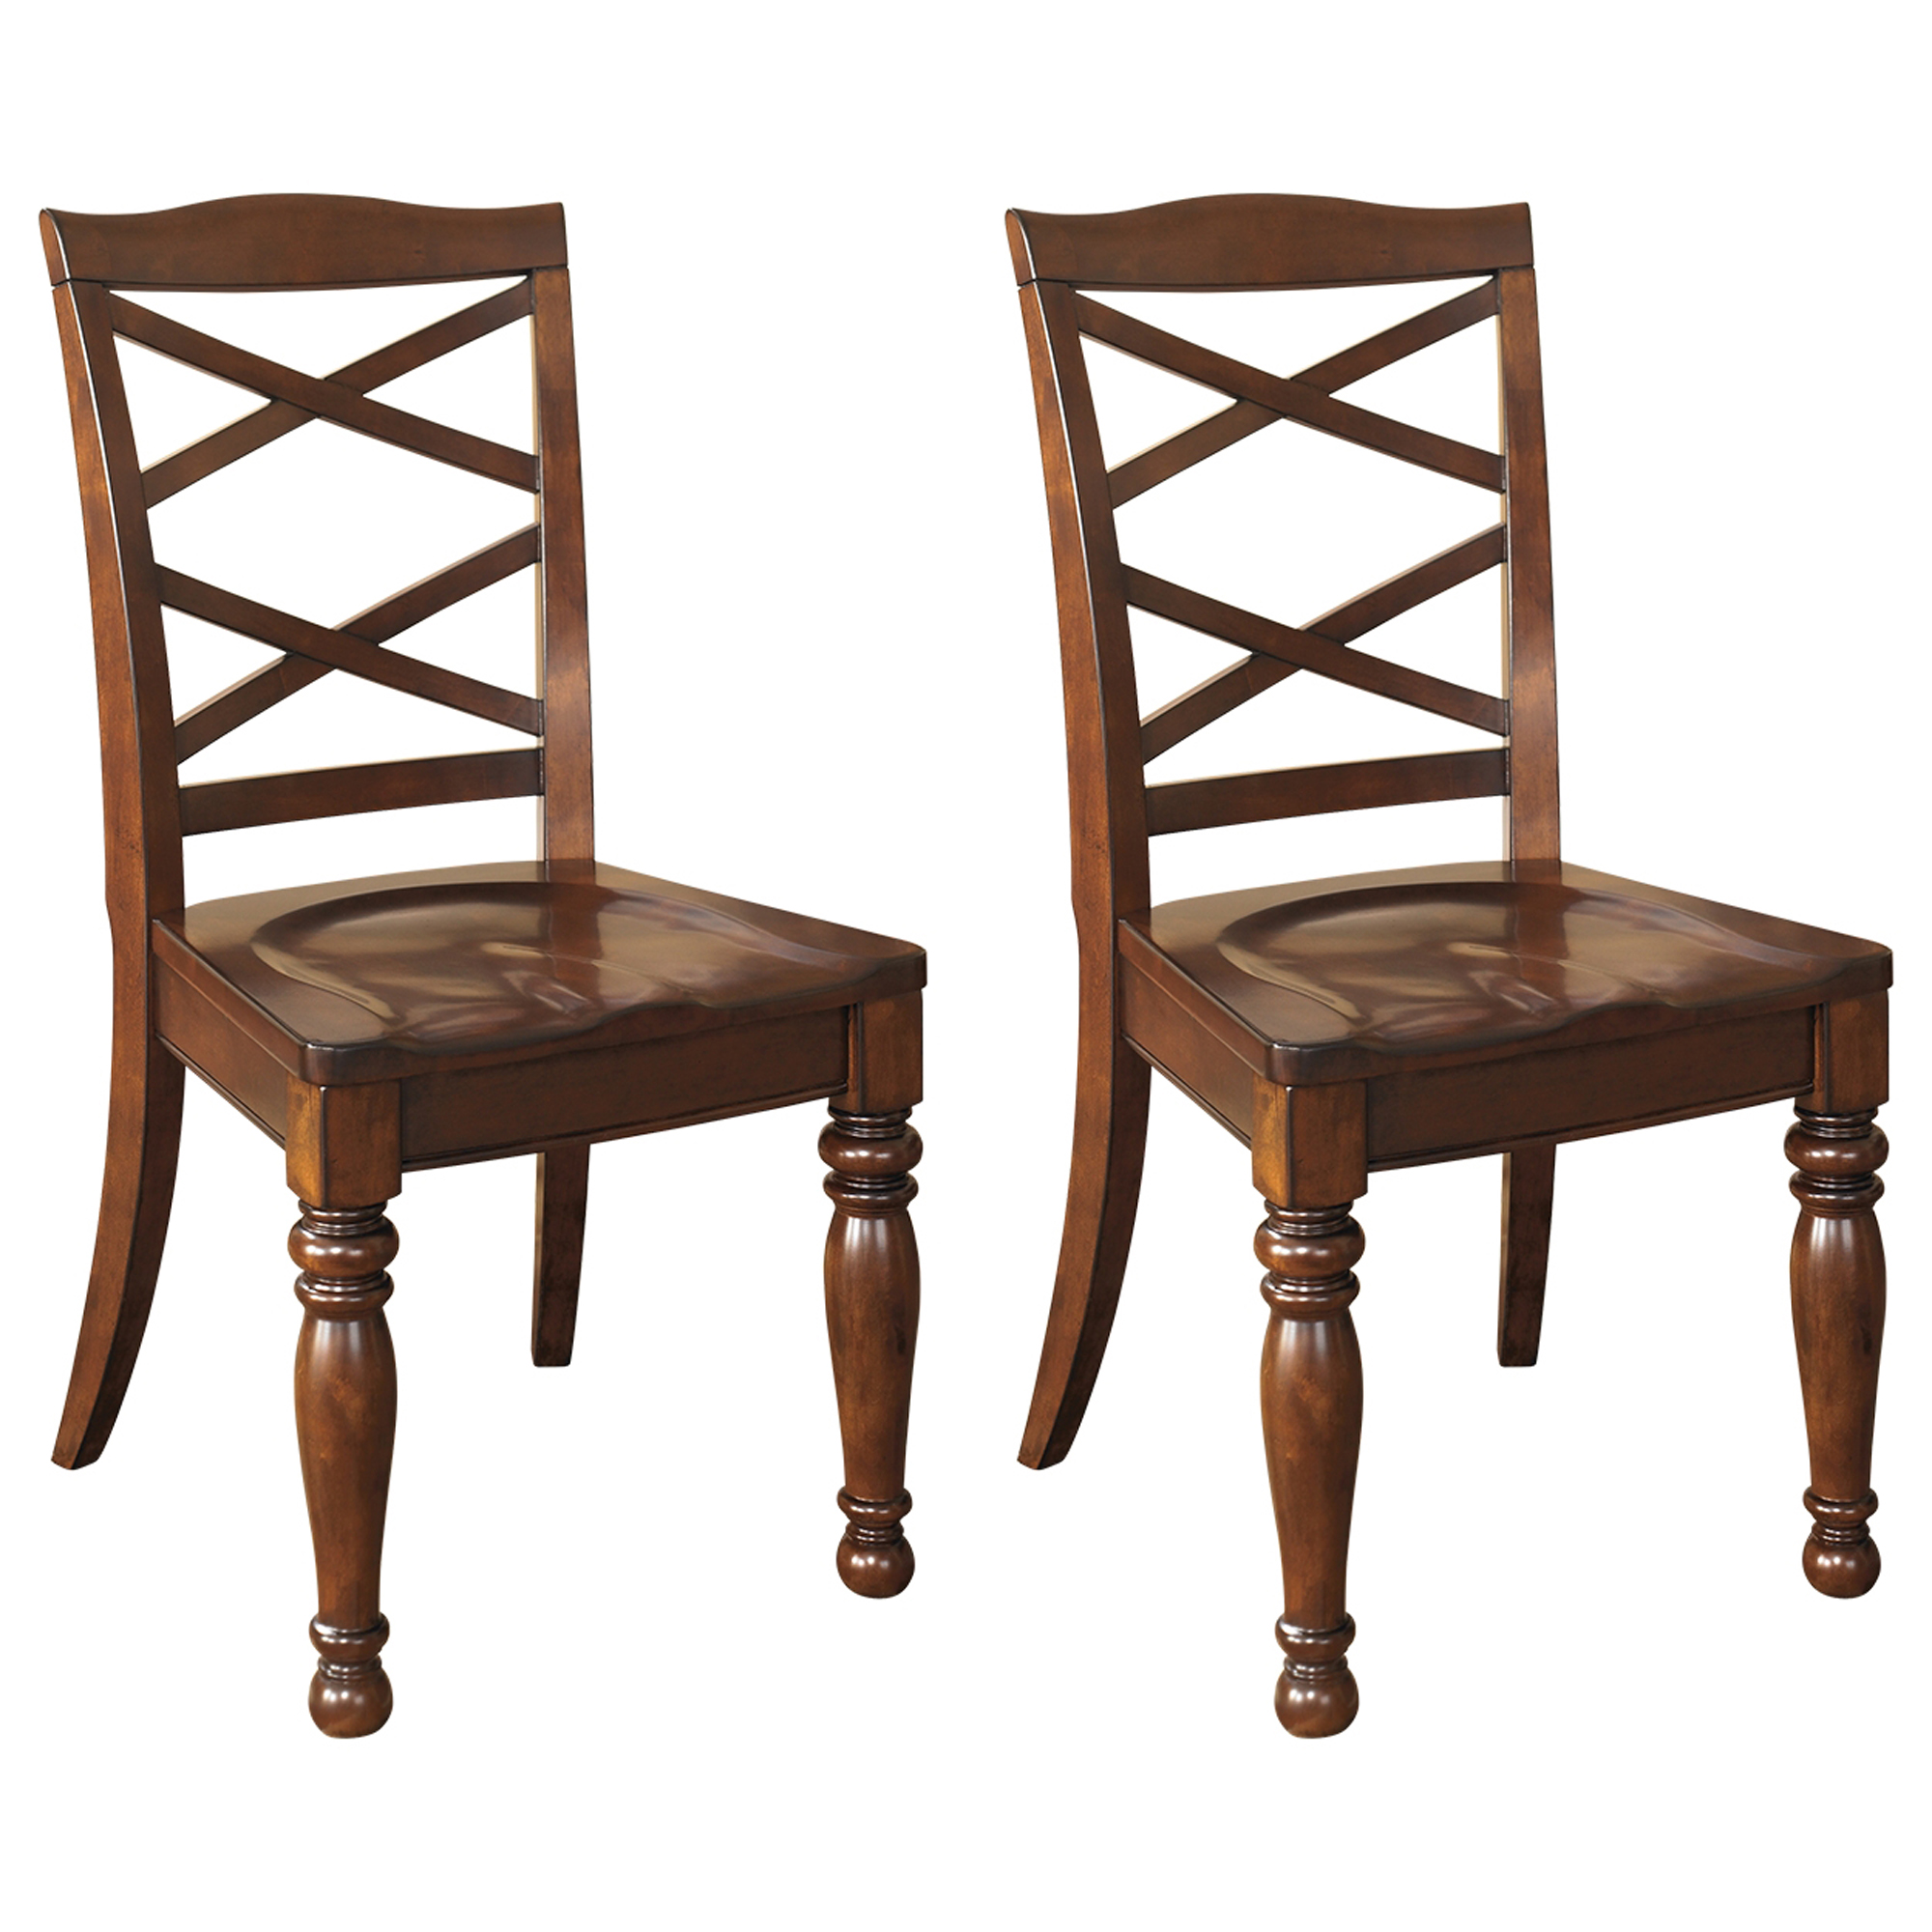 Signature Design by Ashley Porter Dining Room Side Chair Set of 2 Rustic Brown - image 2 of 4